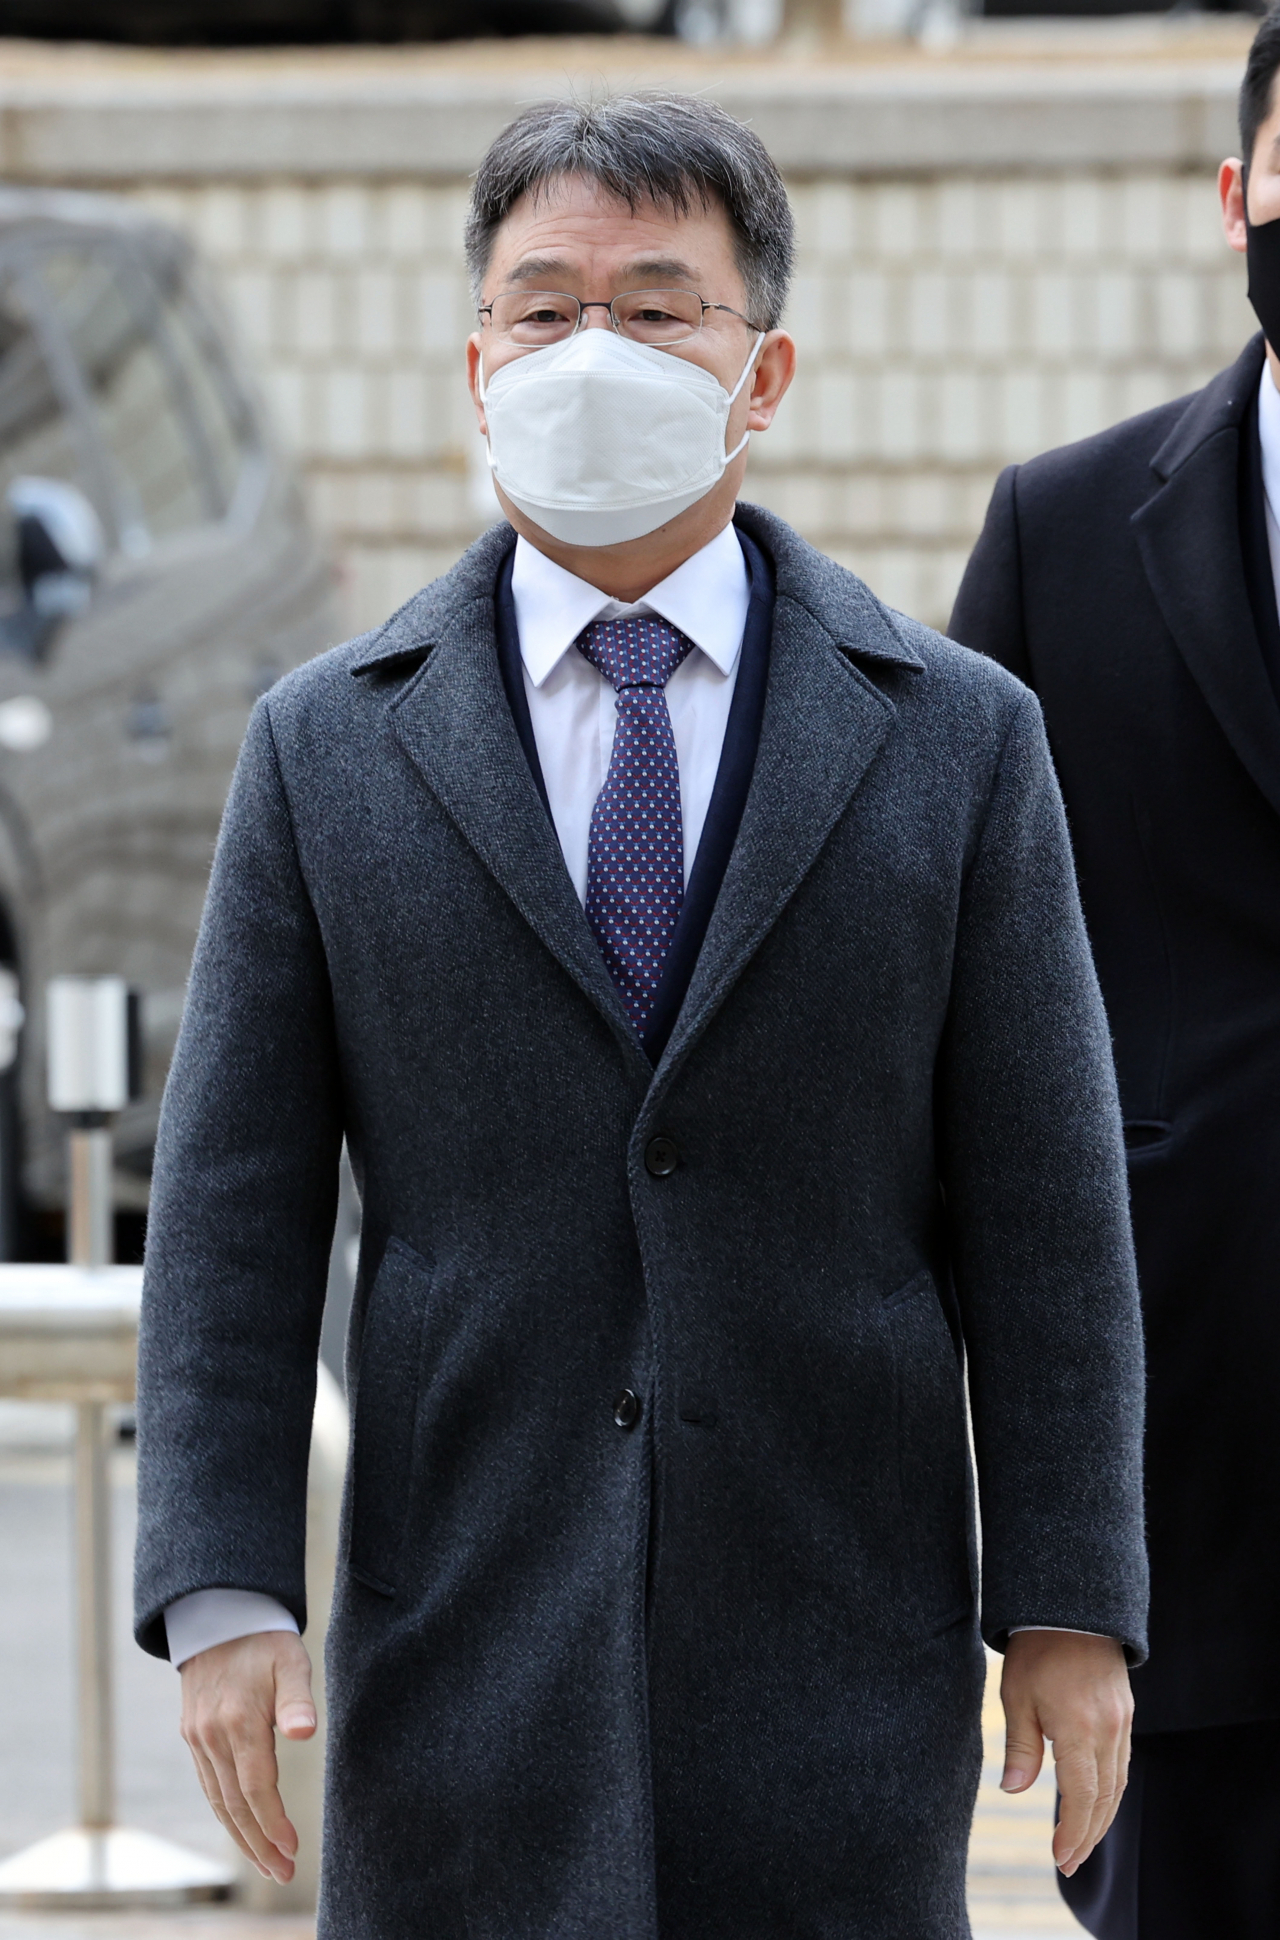 Kim Man-bae, the owner of the asset management company Hwacheon Daeyu, arrives at the Seoul Central District Court last Friday, to attend a hearing over a corruption scandal in connection to a highly lucrative land development project in Seongnam, Gyeonggi Province. (Yonhap)